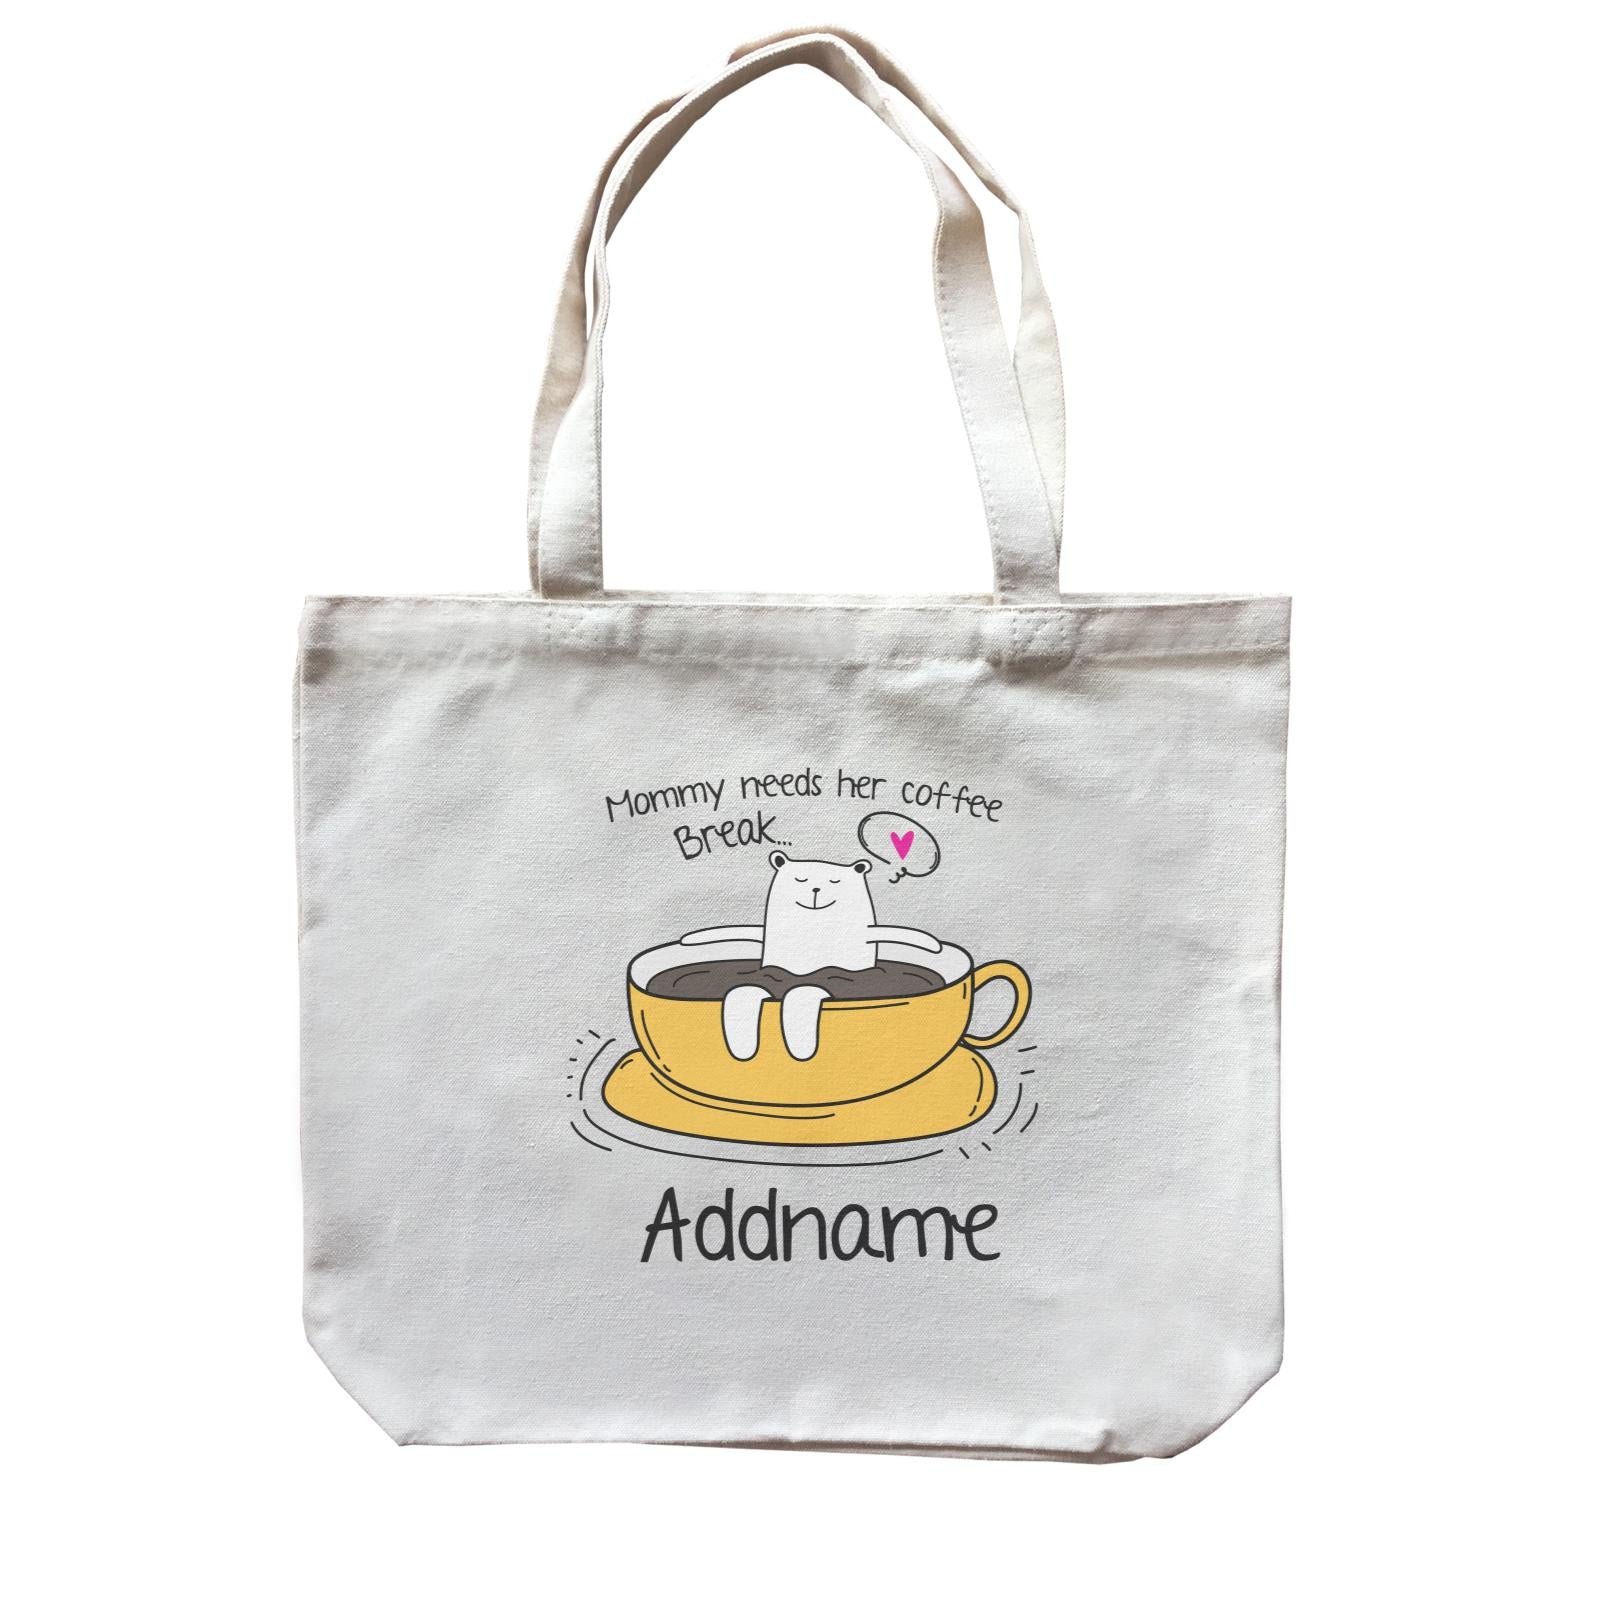 Cute Animals And Friends Series Mommy Needs Her Coffee Break Bear Addname Canvas Bag